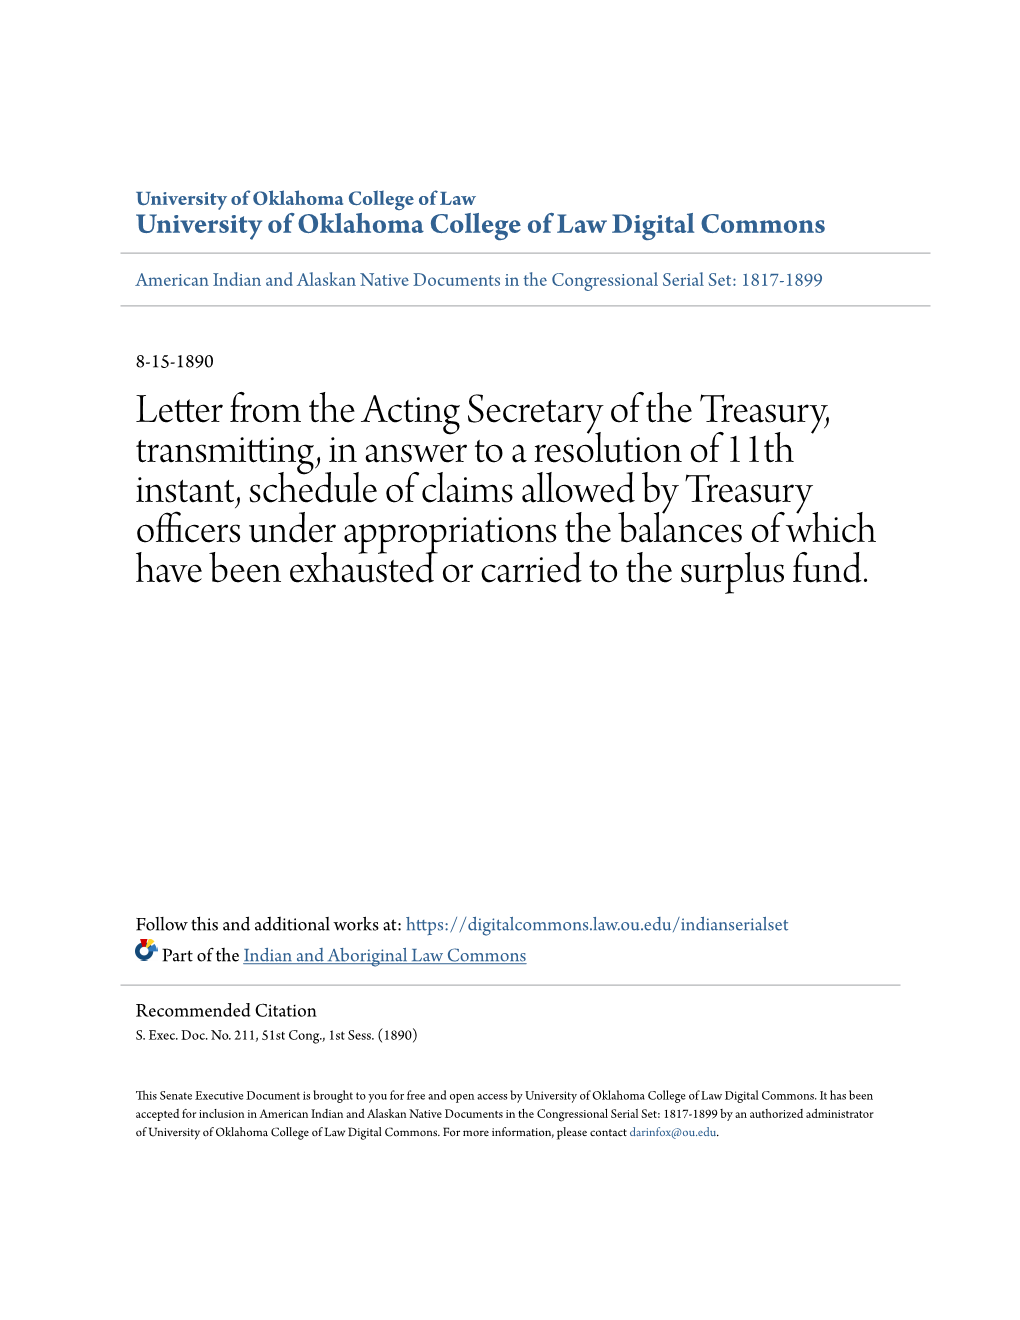 Letter from the Acting Secretary of the Treasury, Transmitting, in Answer To